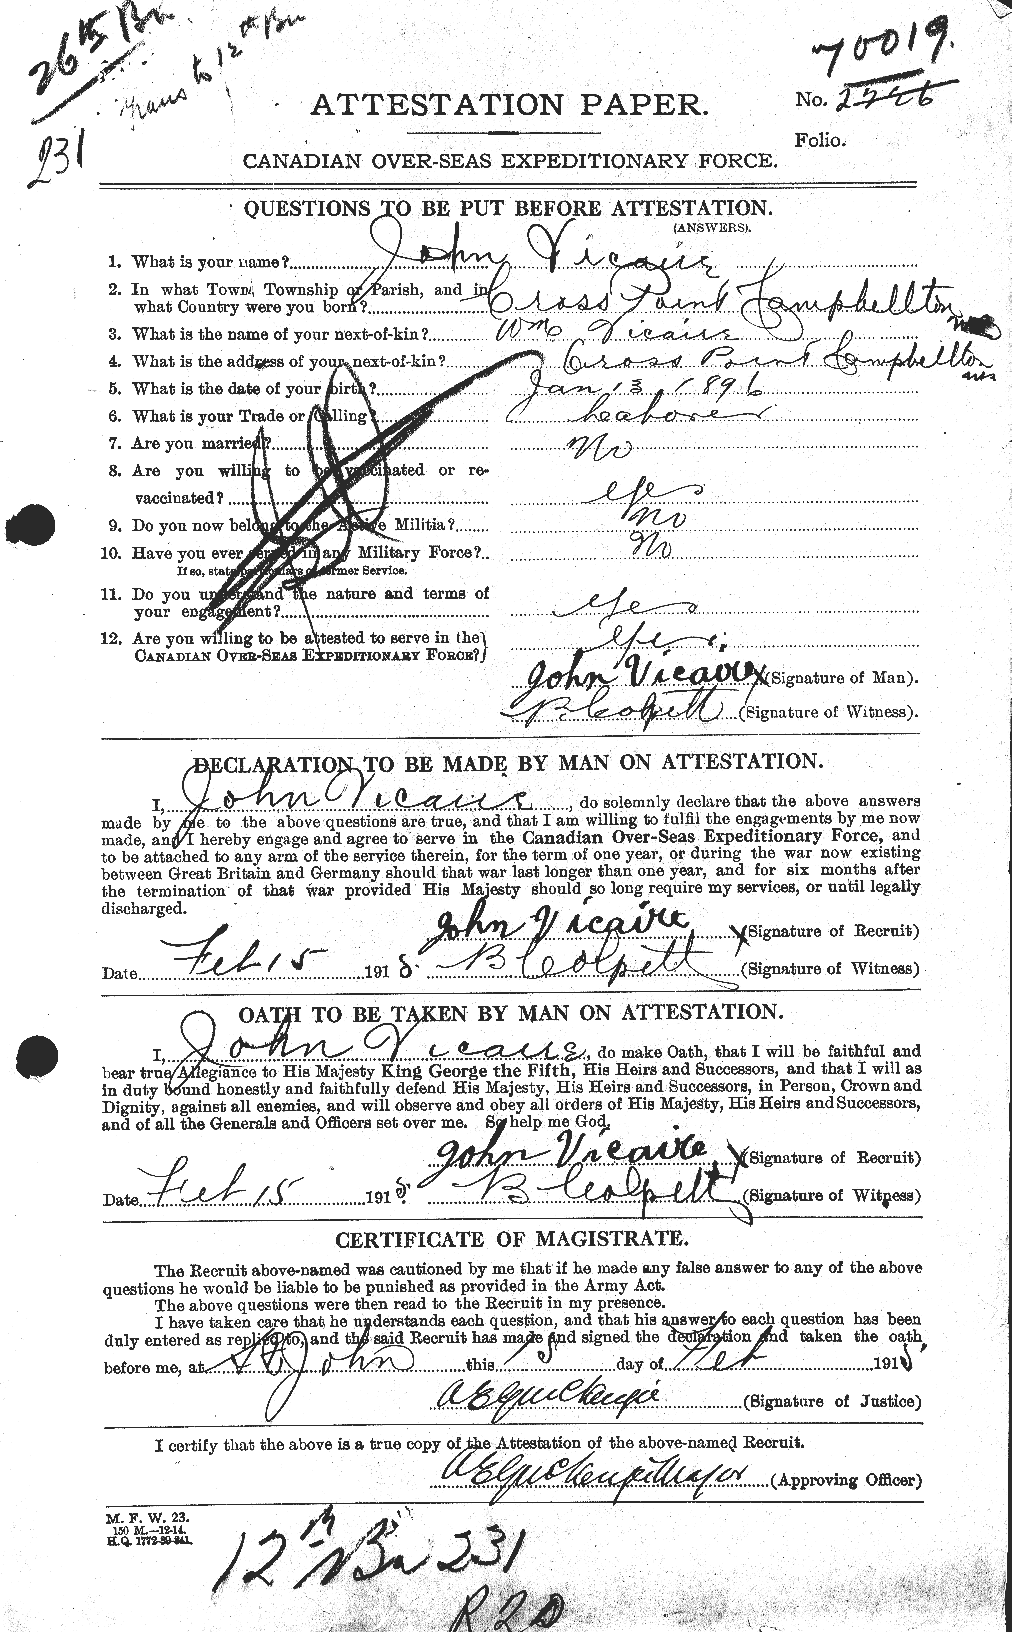 Personnel Records of the First World War - CEF 652129a